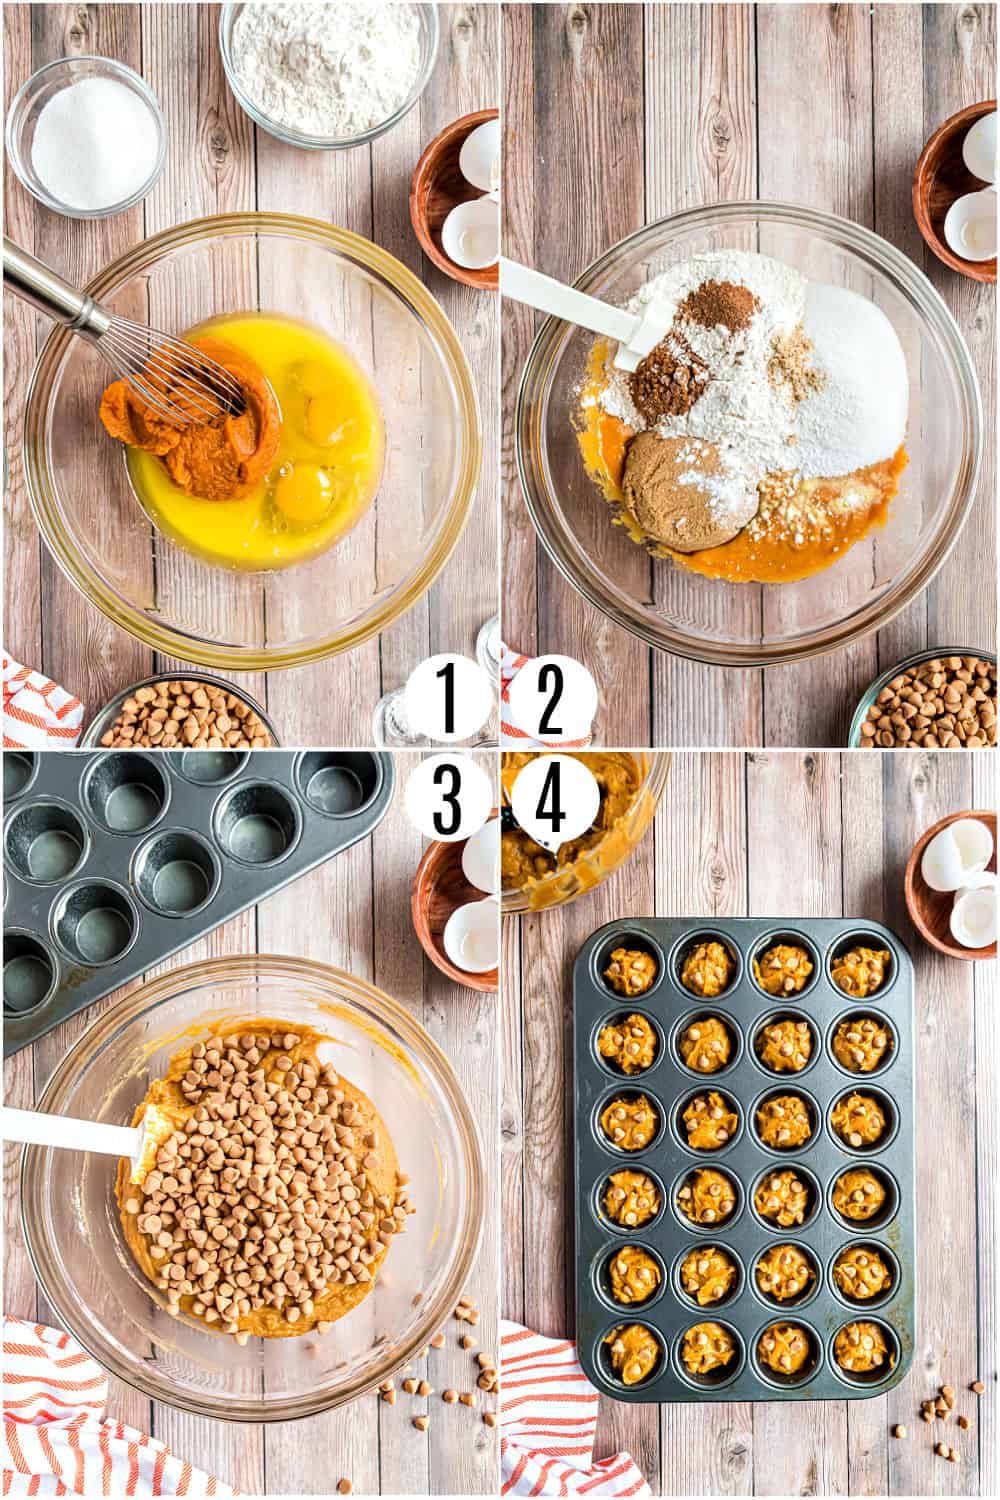 Step by step photos showing how to make pumpkin muffins with butterscotch.